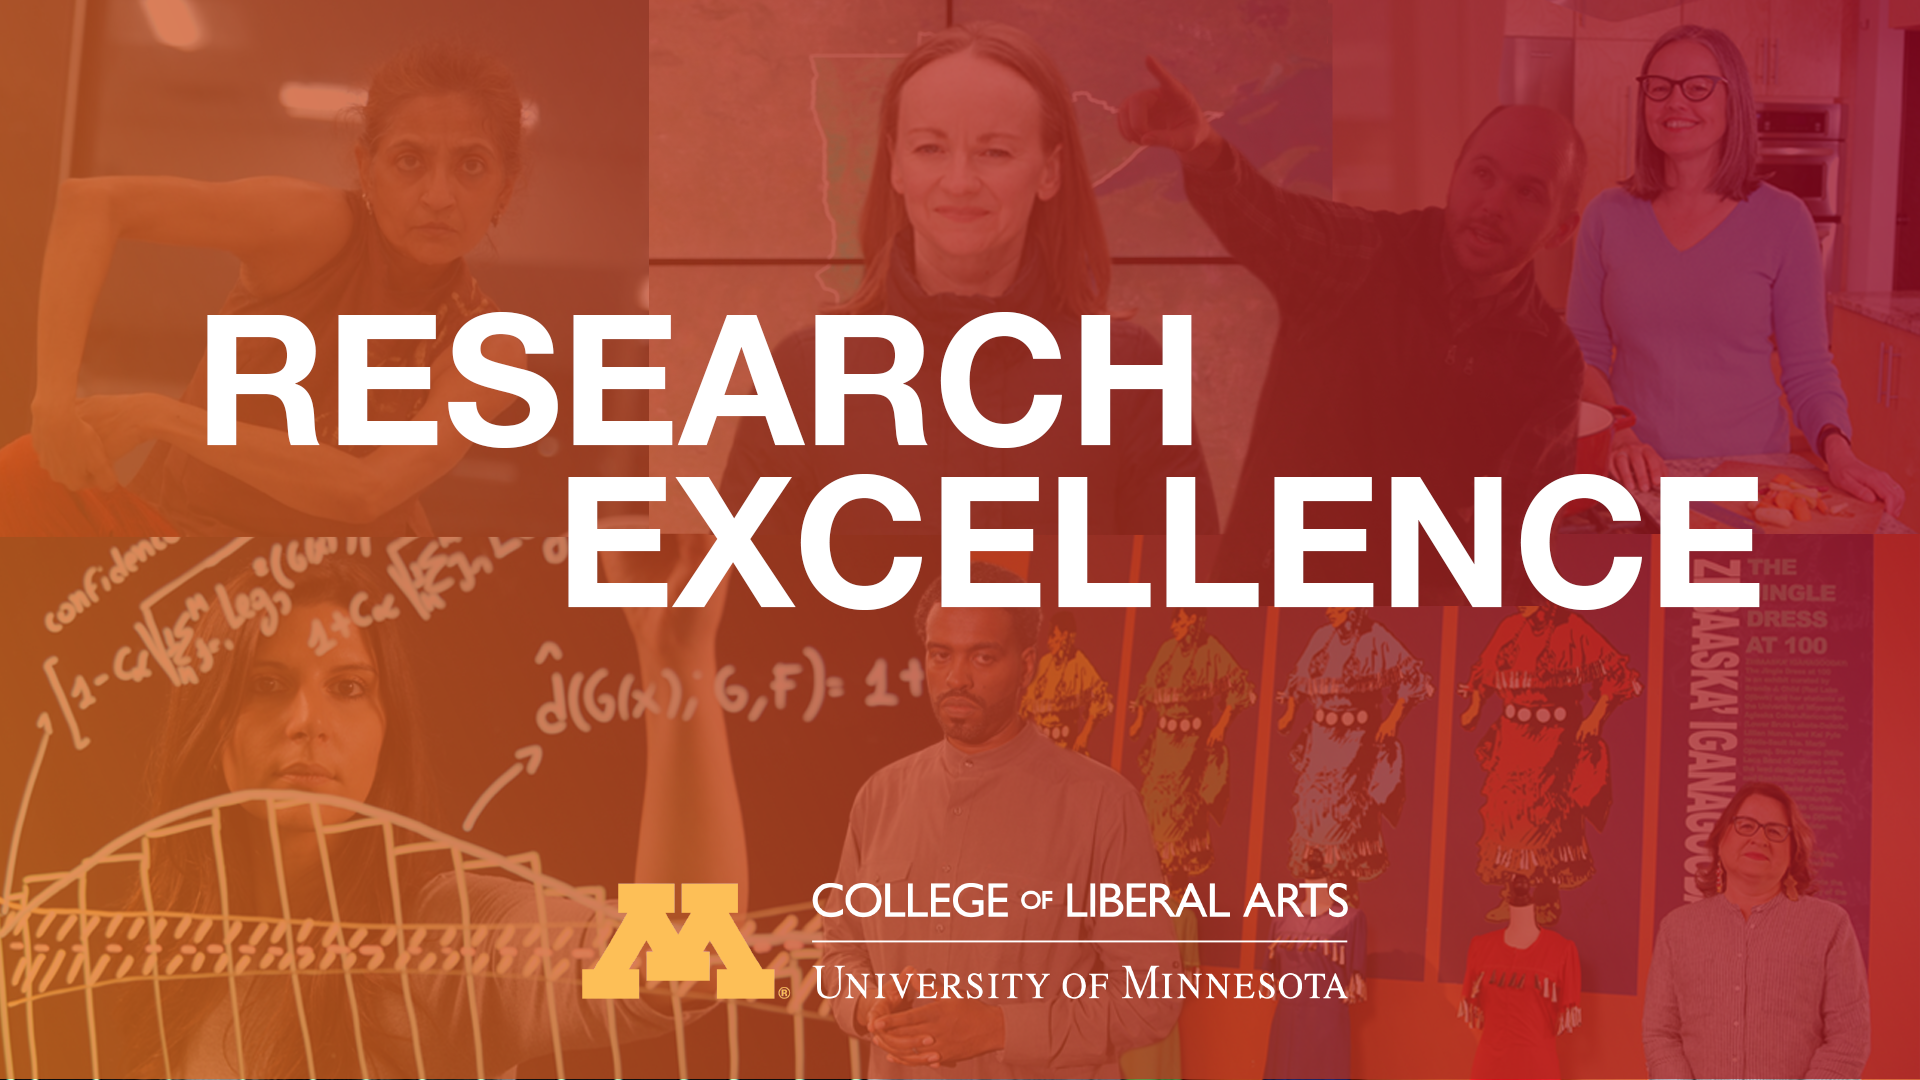 Photo compilation of 7 different people who are featured in the video. The text "Research Excellence College of Liberal Arts University of Minnesota" is placed across the bottom of the photo.